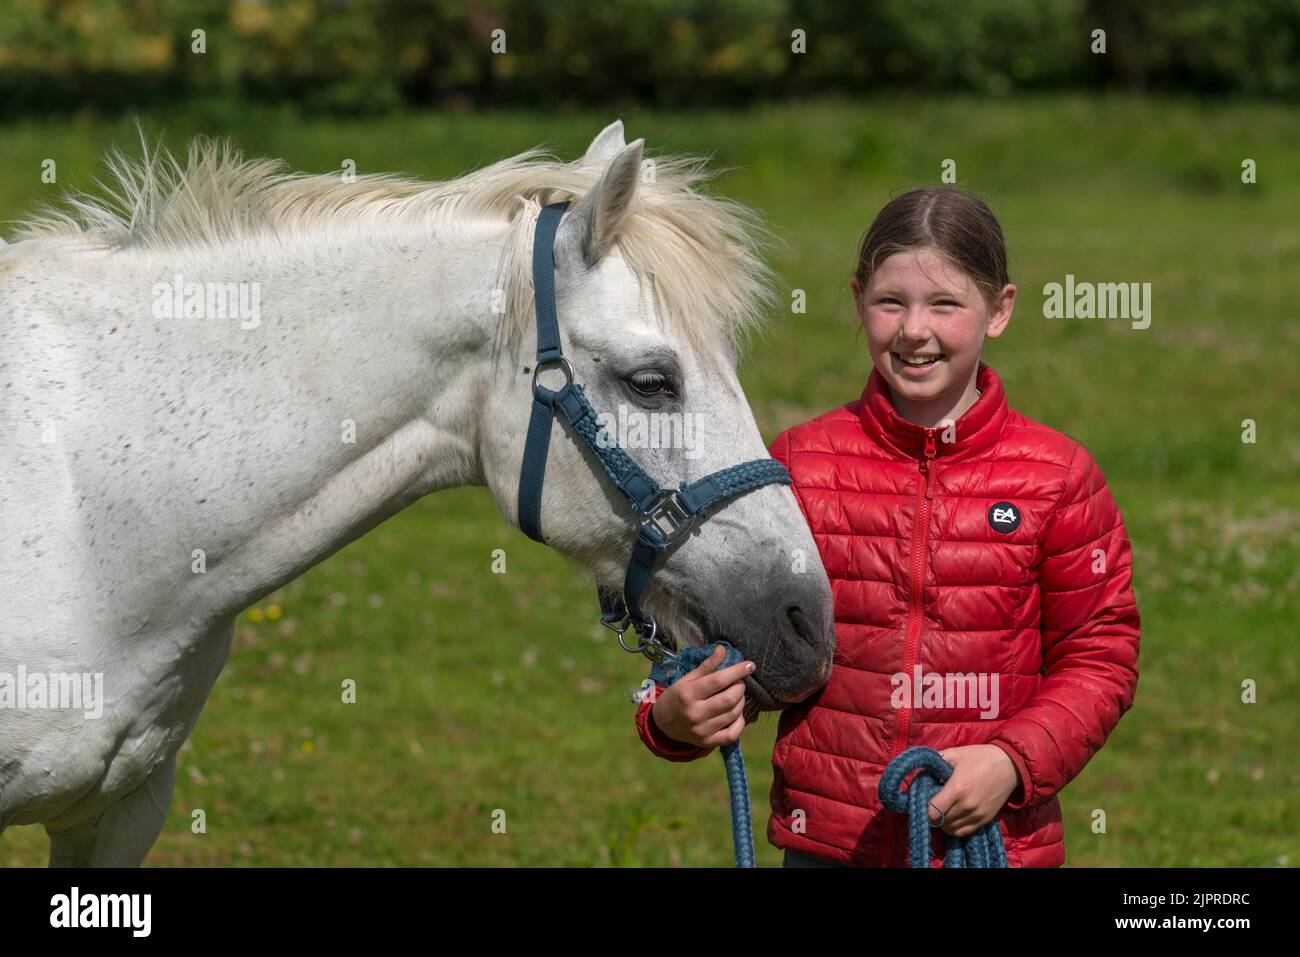 Girl, 10 years, with her horse in the pasture, Mecklenburg-Western Pomerania, Germany Stock Photo